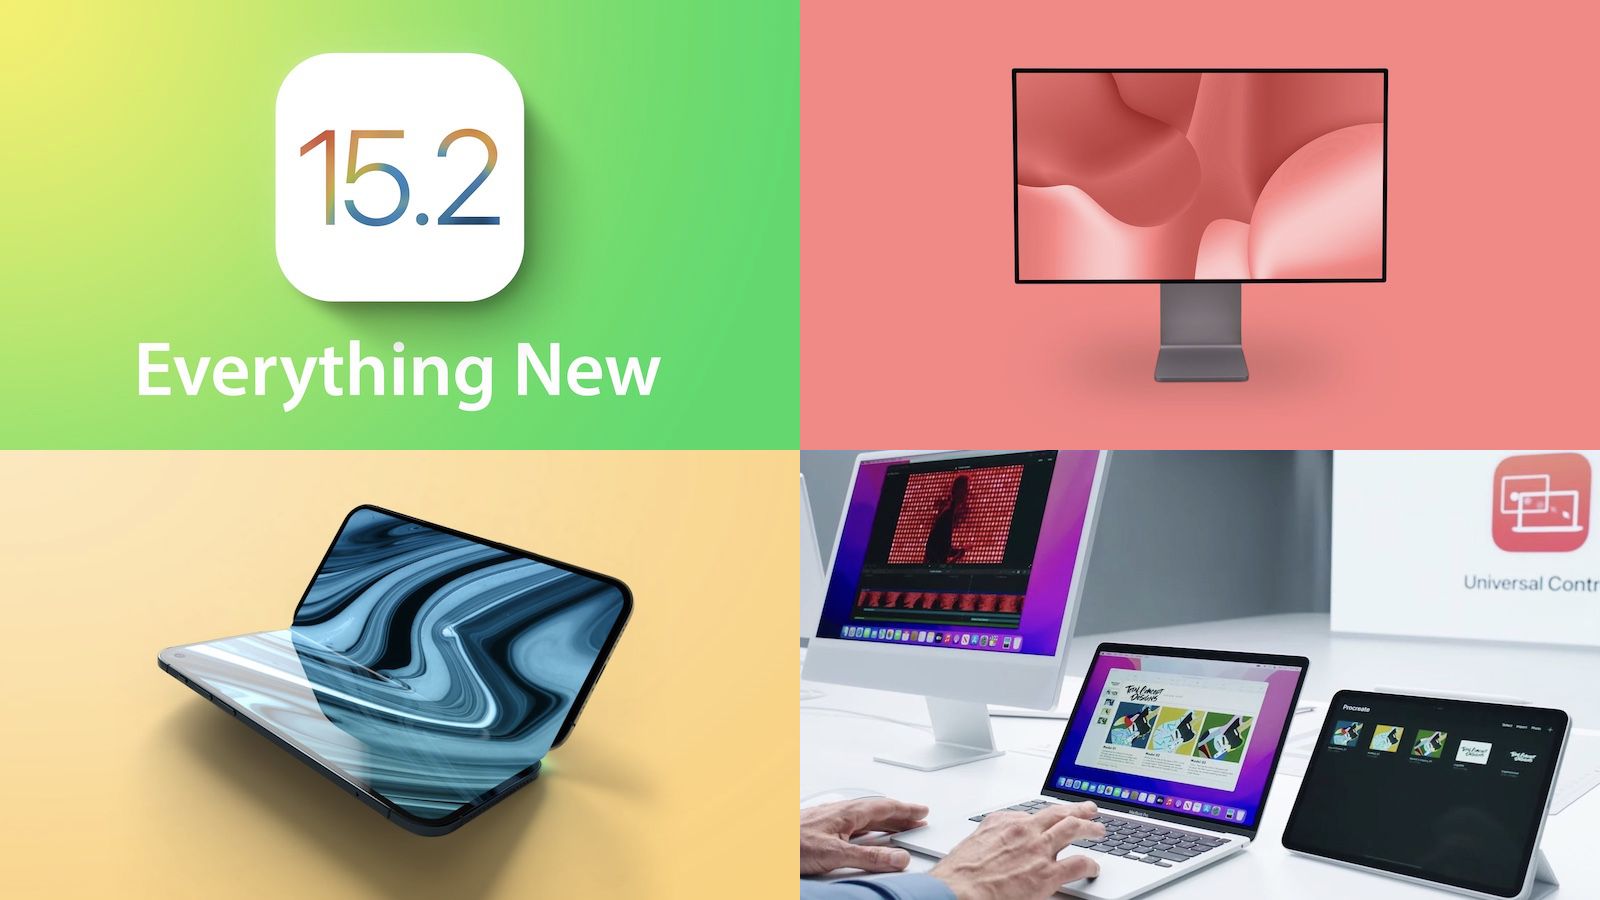 Top Stories: What's New in iOS 15.2, Universal Control Delayed, and More